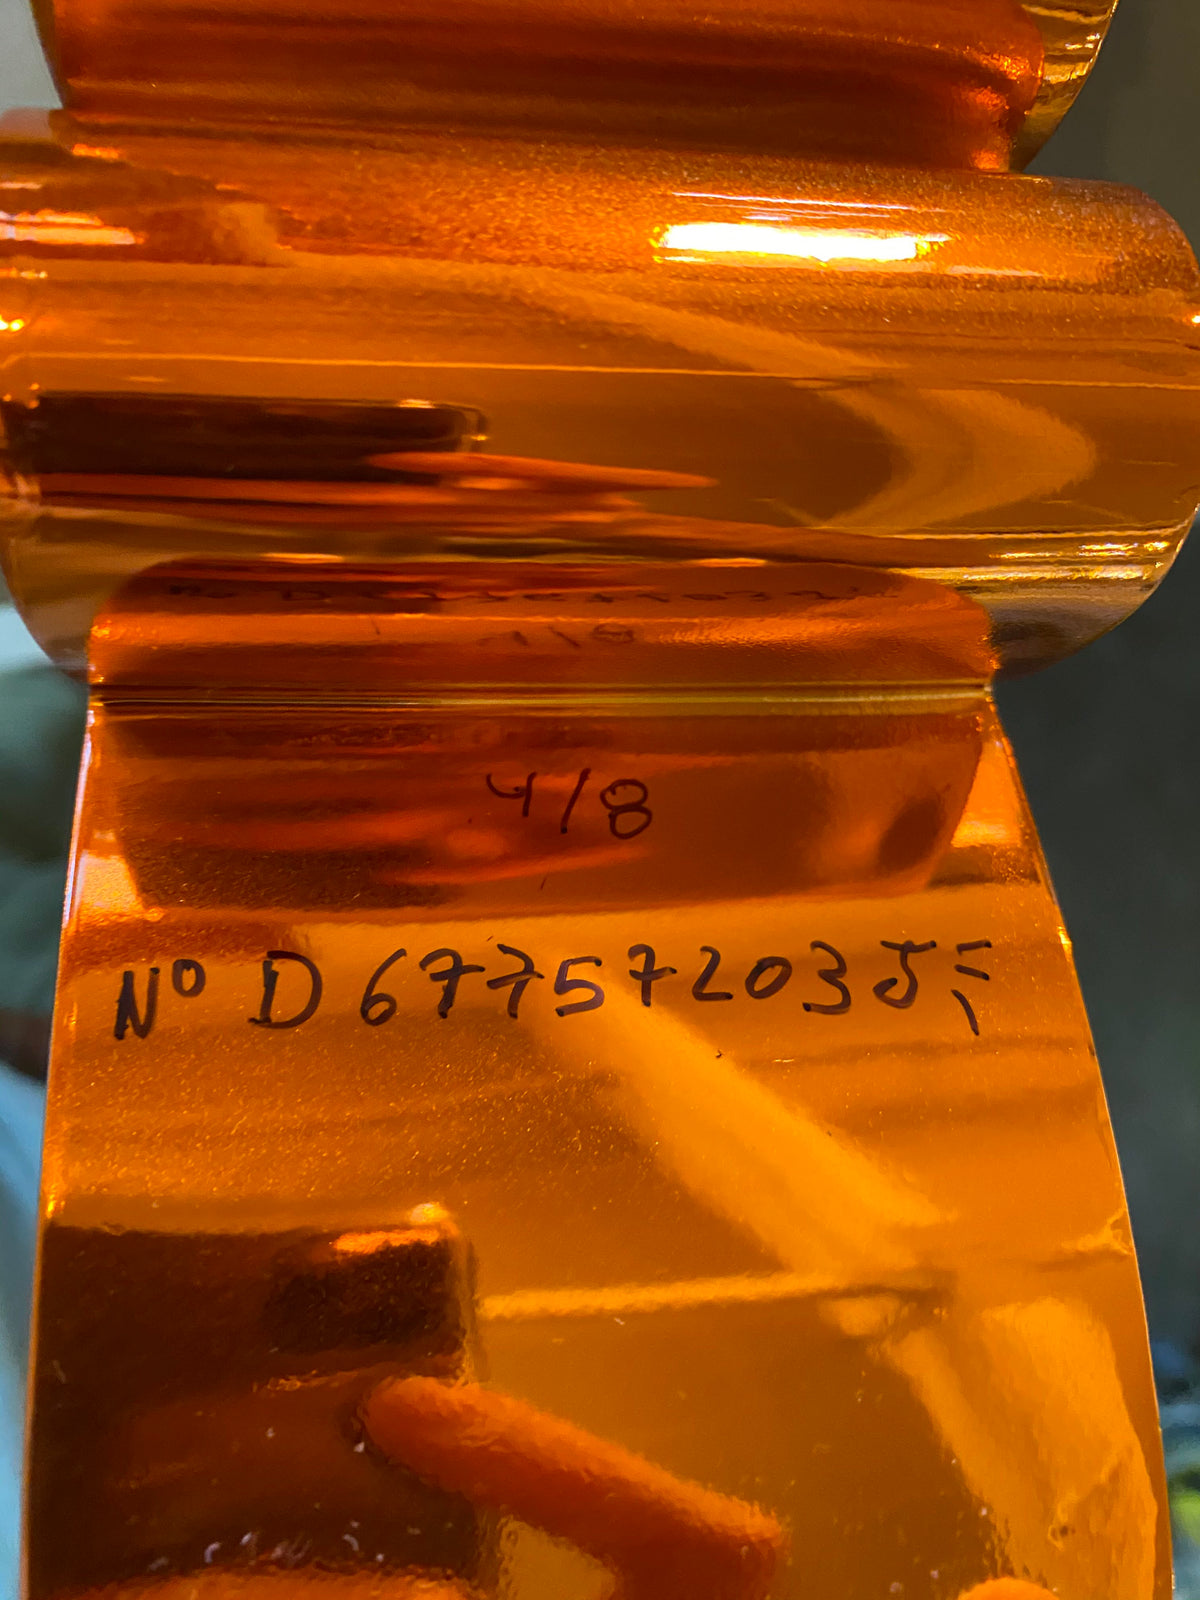 anImage of a reflective piece of orange metal with numbers on it